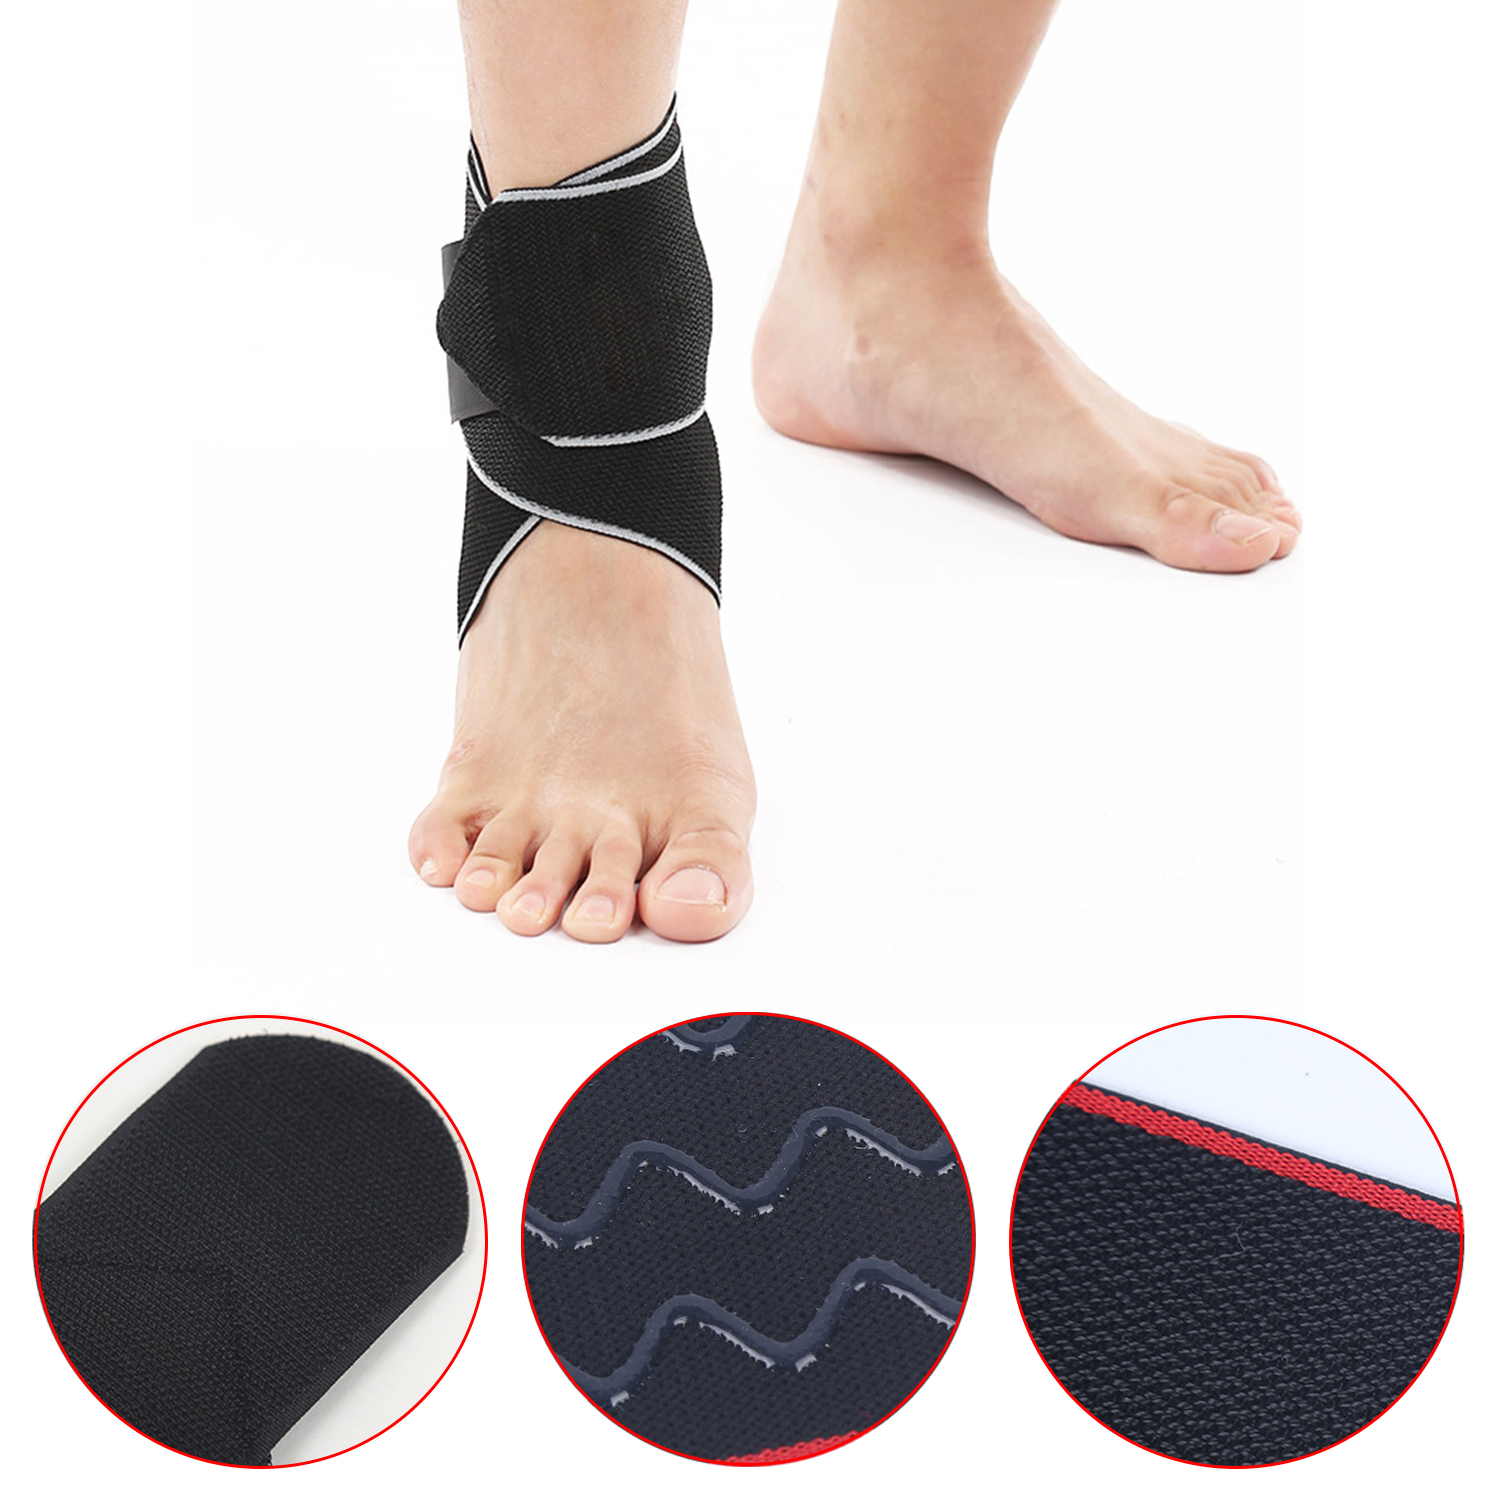 Bandage Wrapped Around Ankle Support Basketball Football Running Ankle Protection Anti-sprain Silicone Non-slip Ankle Support Men And Women